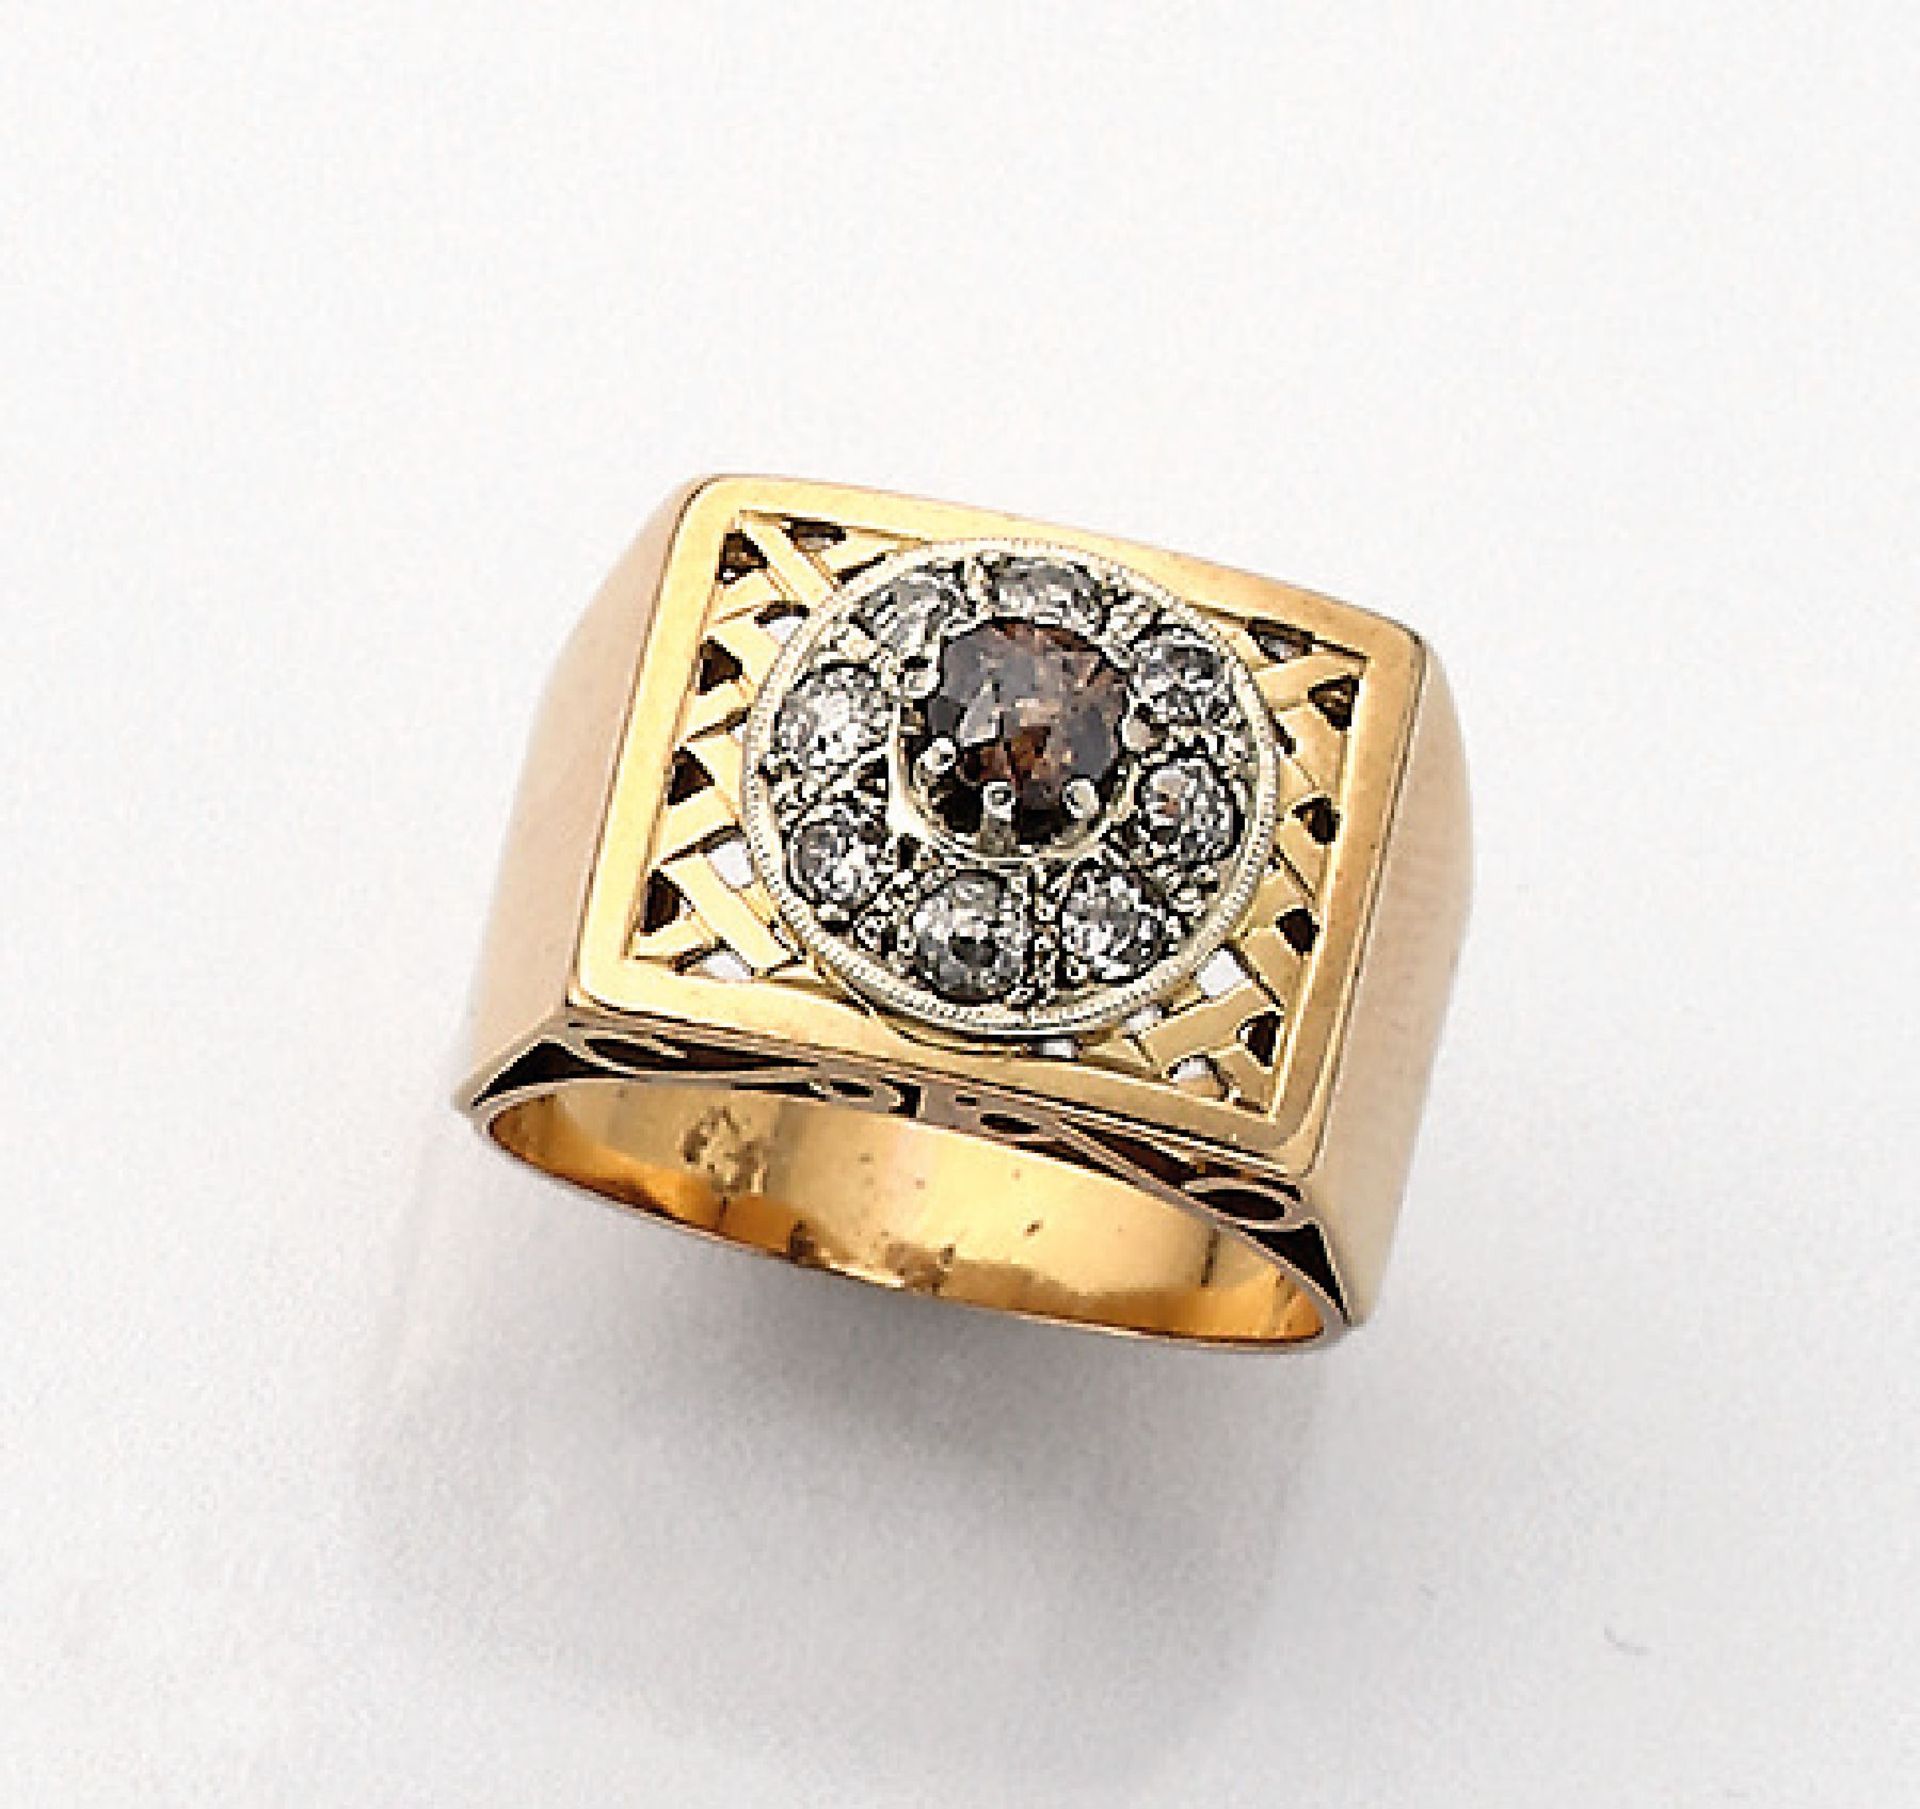 14 kt gold ring with diamonds , 1940er Jahre, YG/WG 585/000 tested, 1 brown old cut diamond